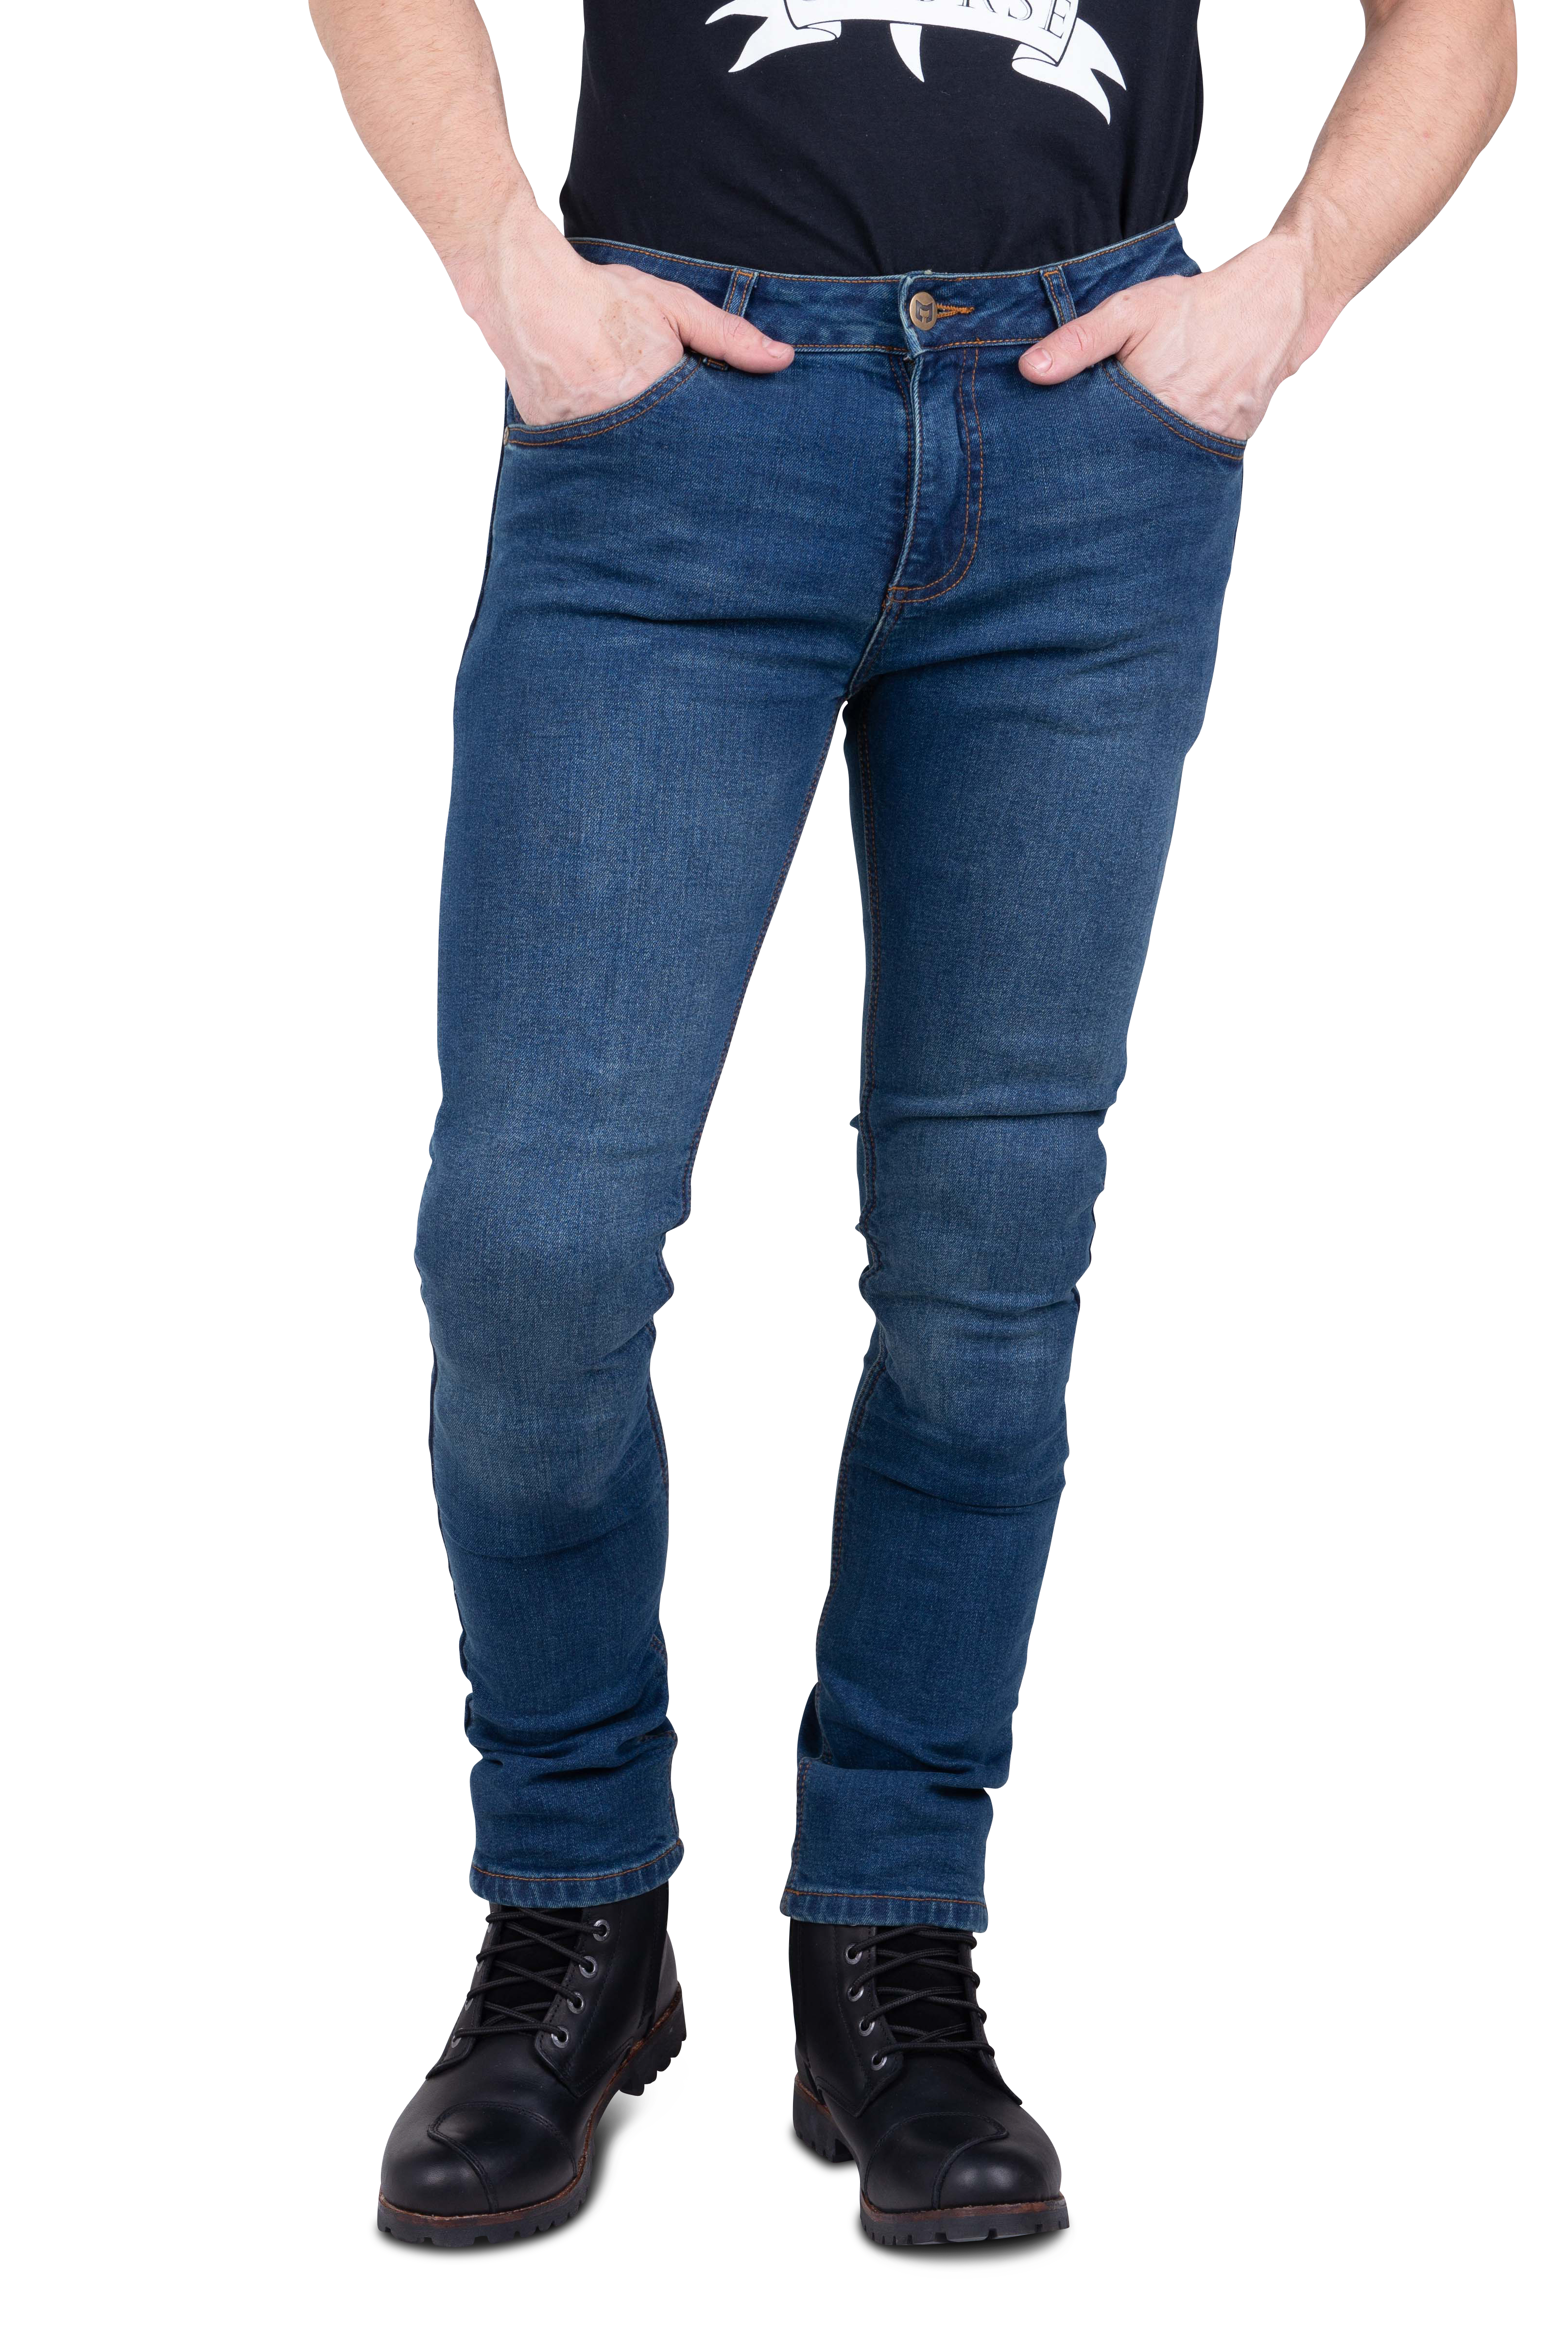 Course Jeans Moto  Ethan Slim Fit Blu Scuro